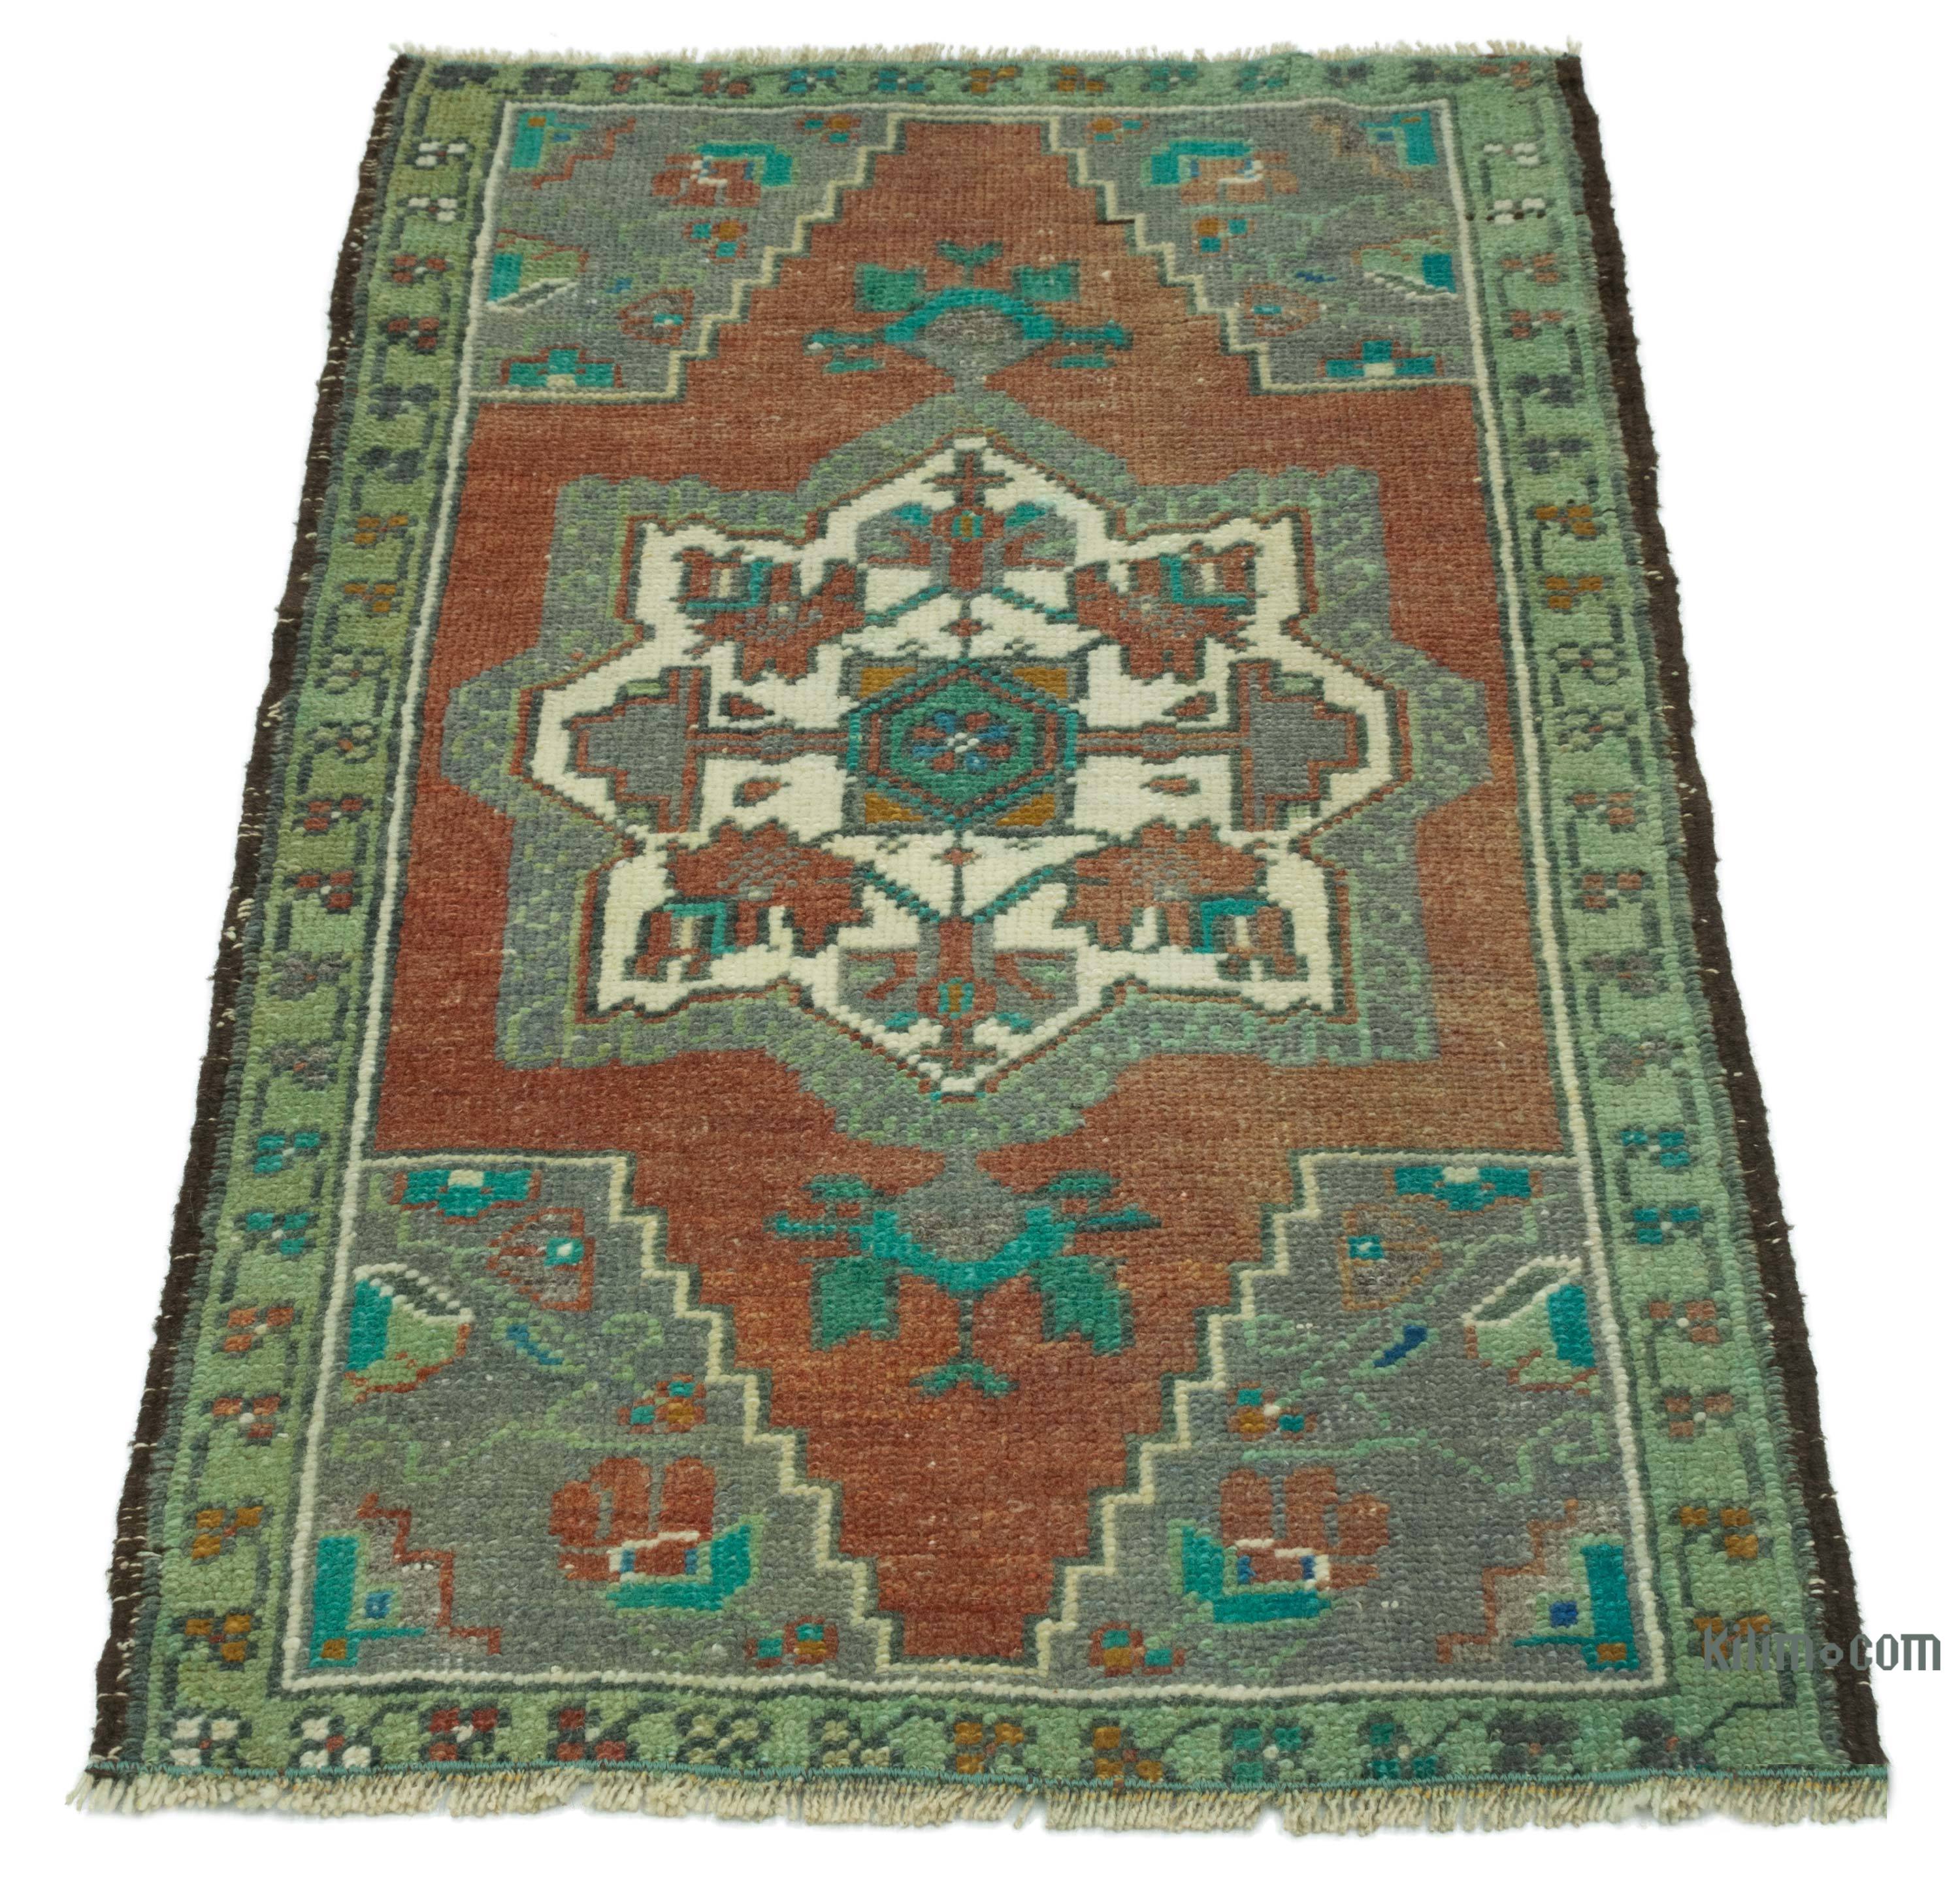 Vintage Turkish Hand-Knotted Rug - 1' 8 x 2' 9 (20 x 33)